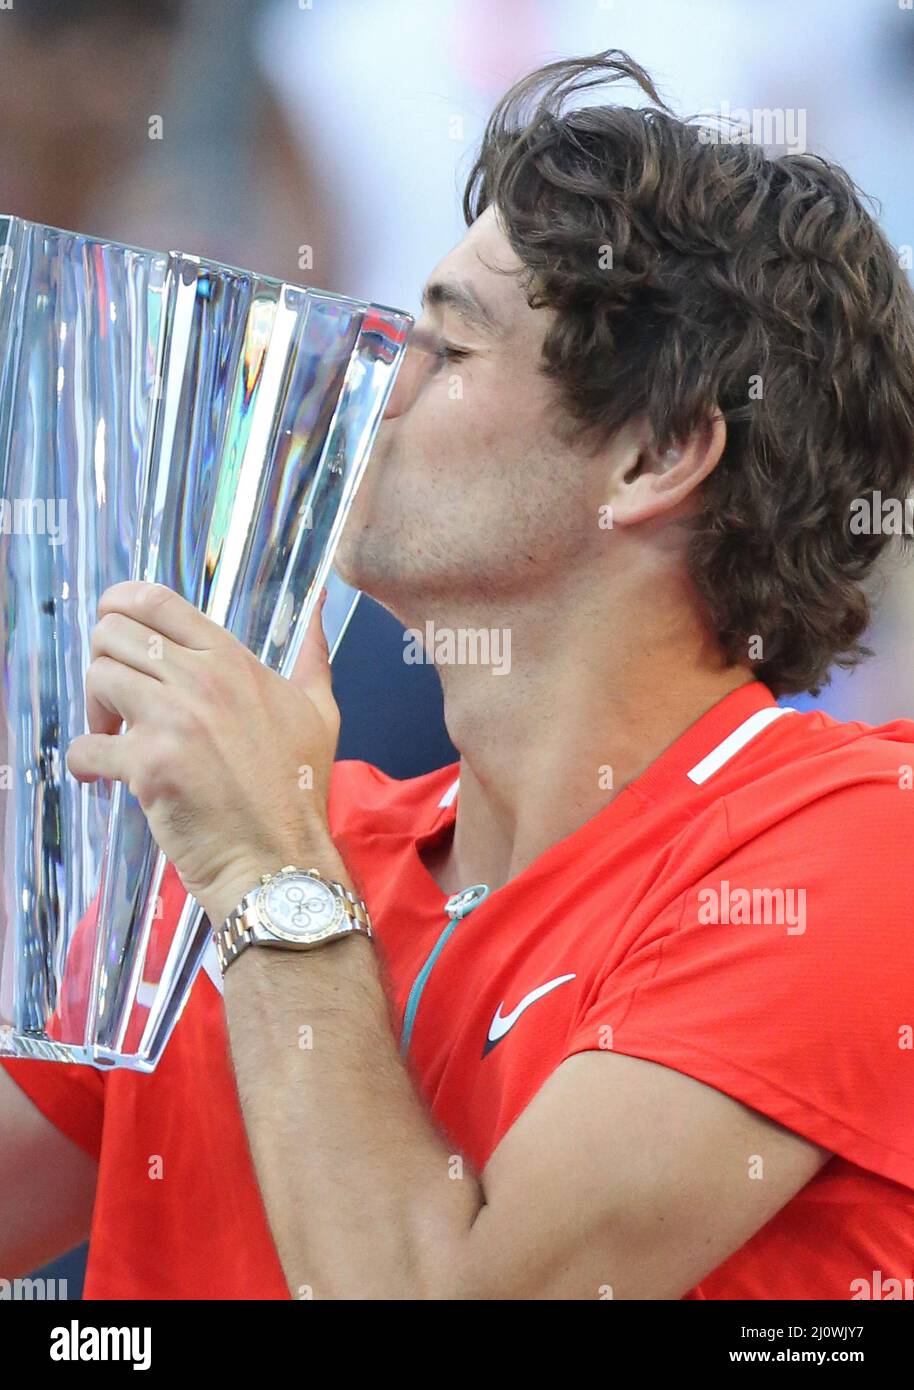 Rafael nadal spain kisses trophy hi-res stock photography and images